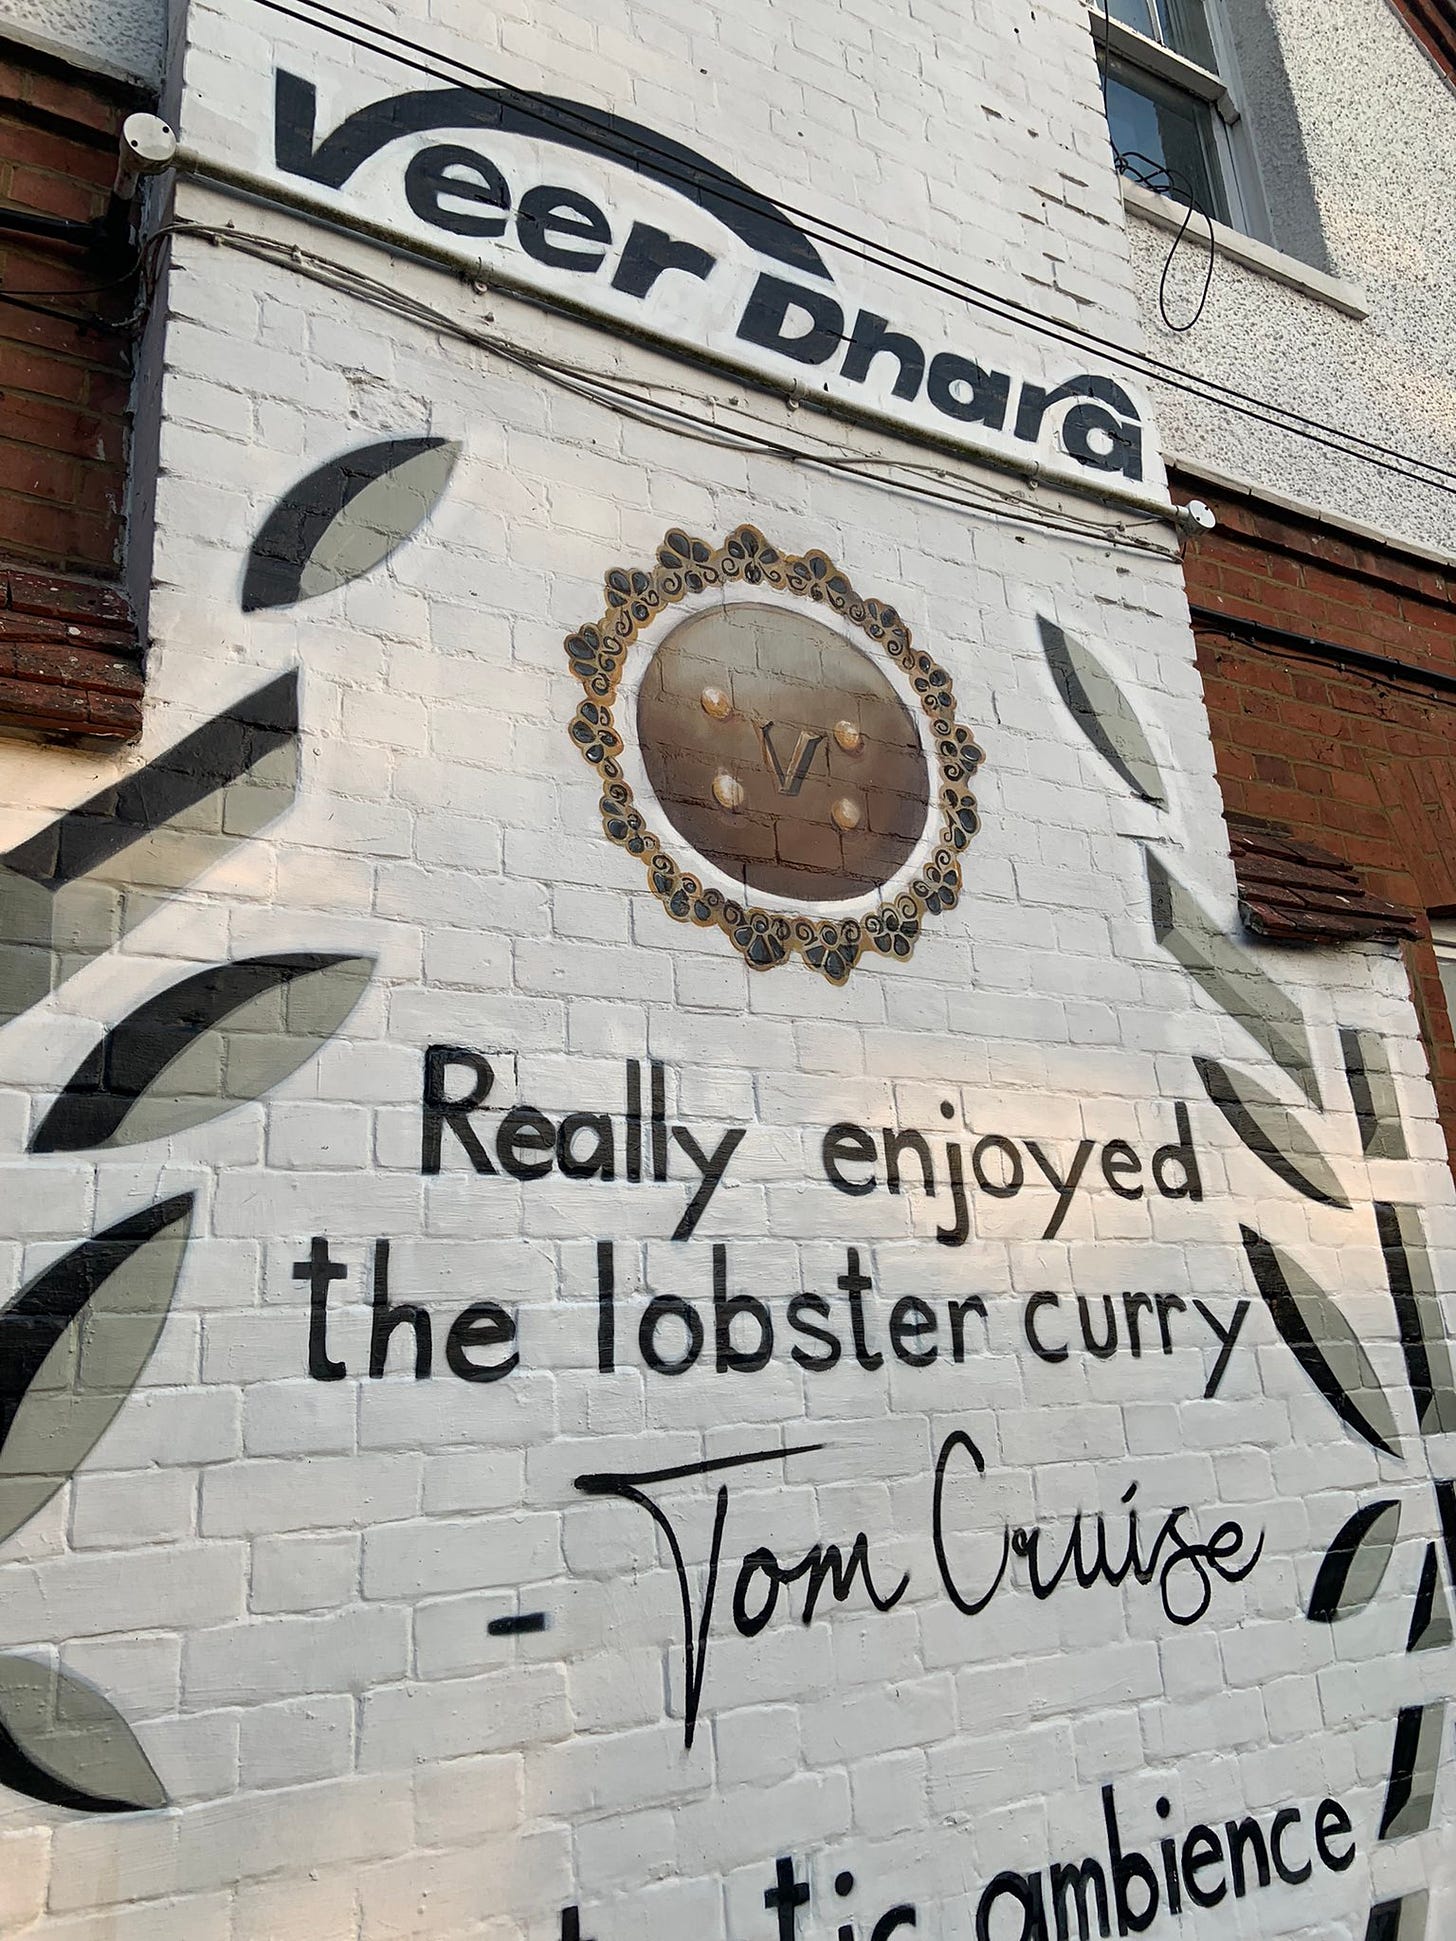 Mark Cox on Twitter: "I am not sure this is how big Tom Cruise would  express himself after a good curry- is it? Maybe it was a local man called Tom  Cruise…visiting